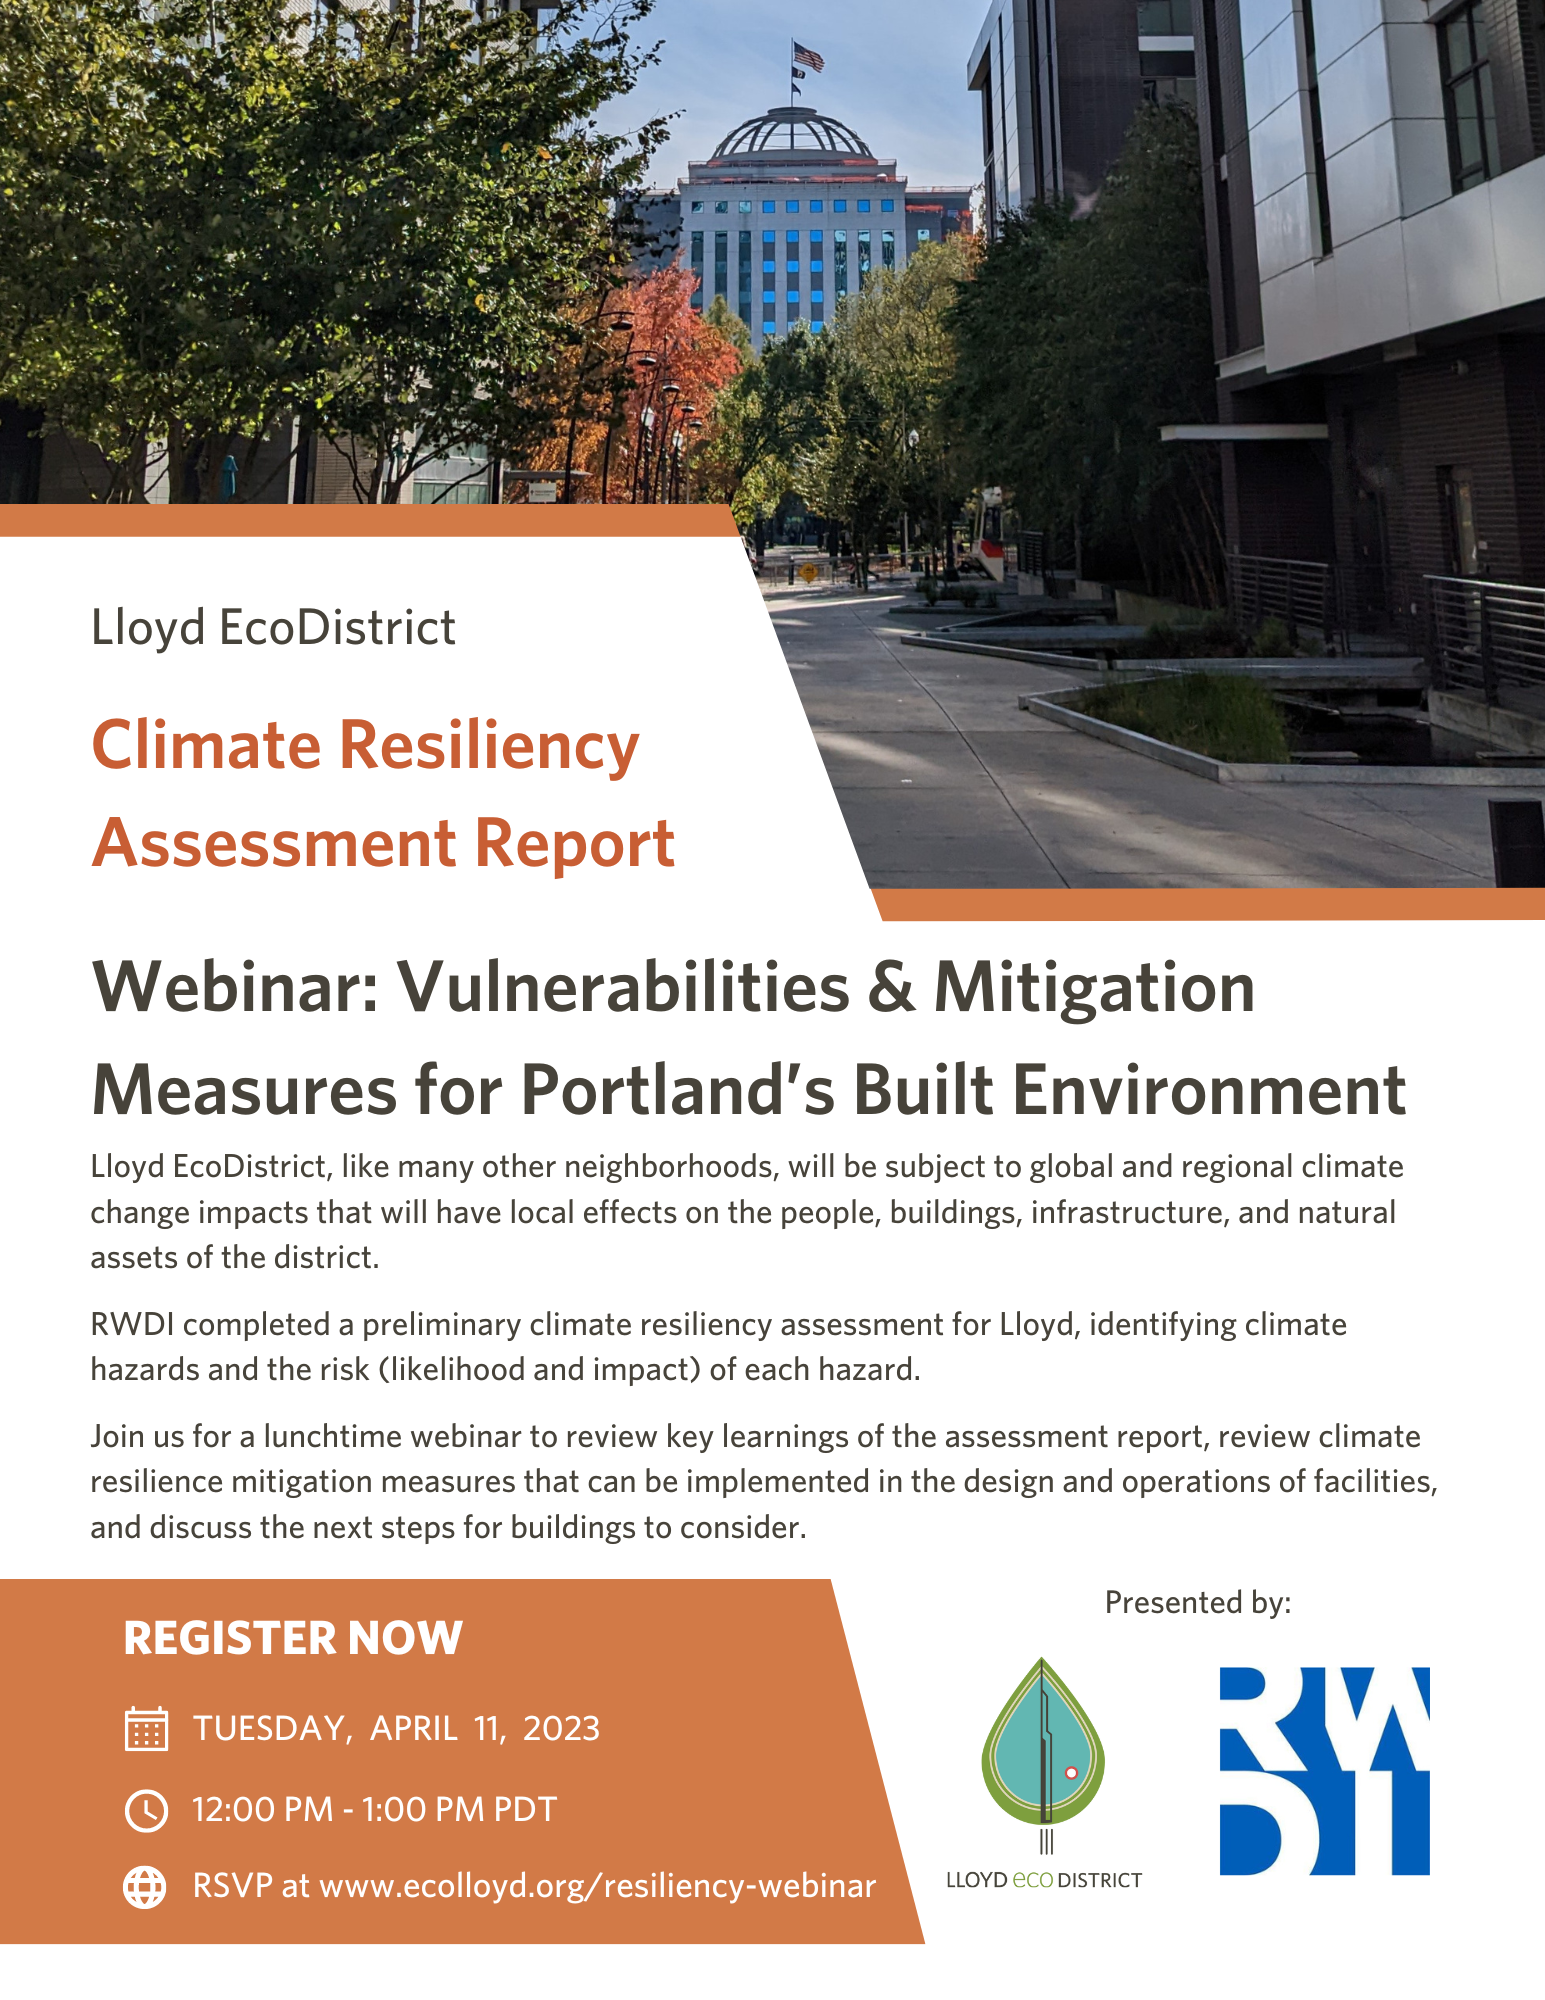 Lloyd EcoDistrict Climate Resiliency Assessment Report: Vulnerabilities and Mitigation Measures for Portland’s Built Environment